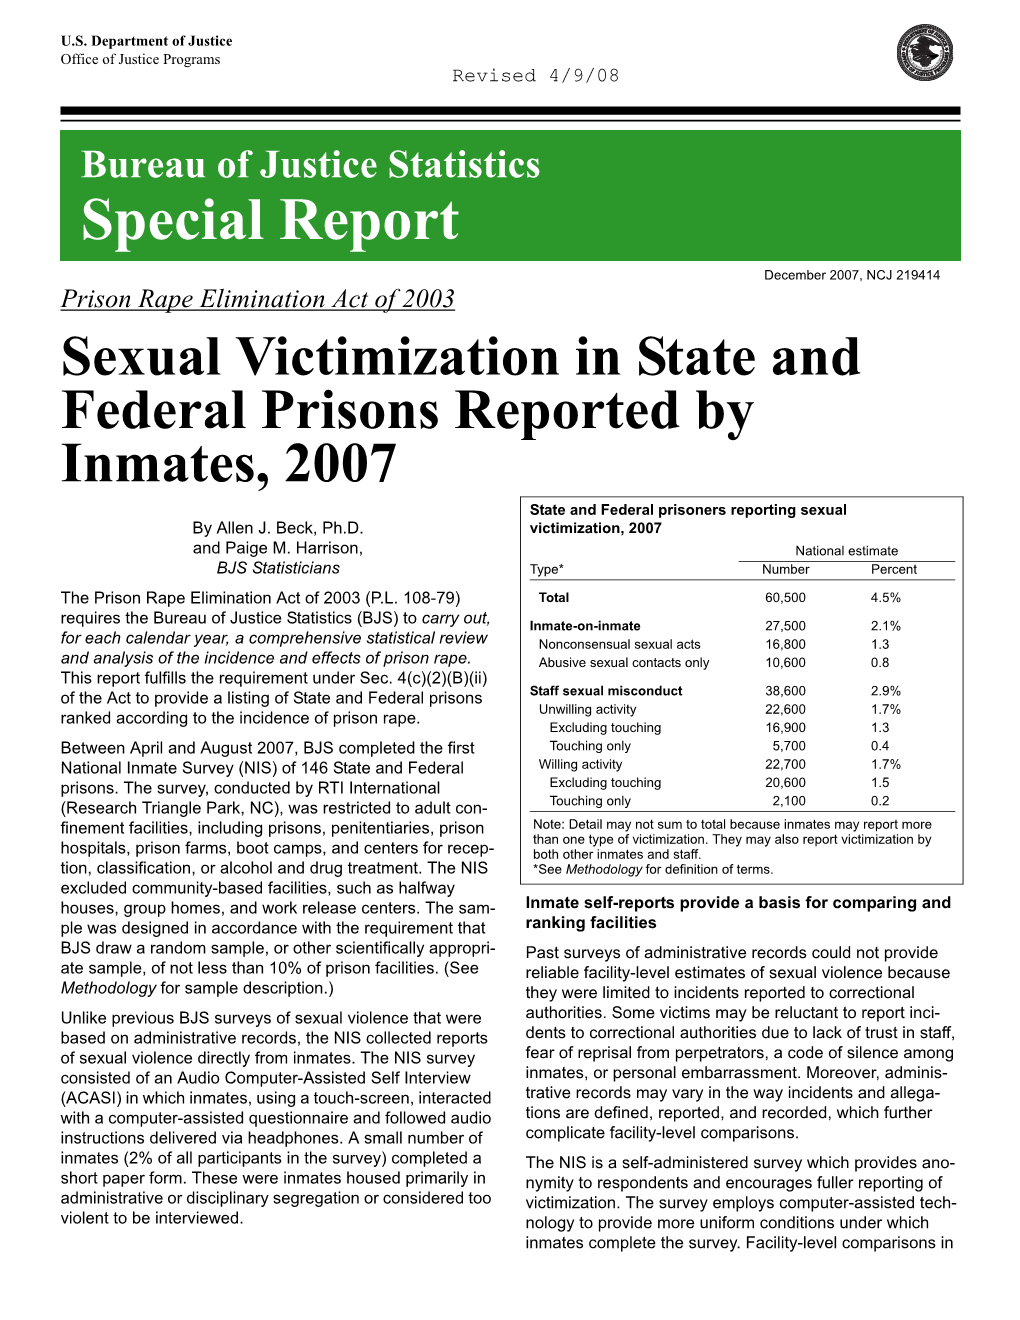 Sexual Victimization in State and Federal Prisons Reported by Inmates, 2007 State and Federal Prisoners Reporting Sexual by Allen J